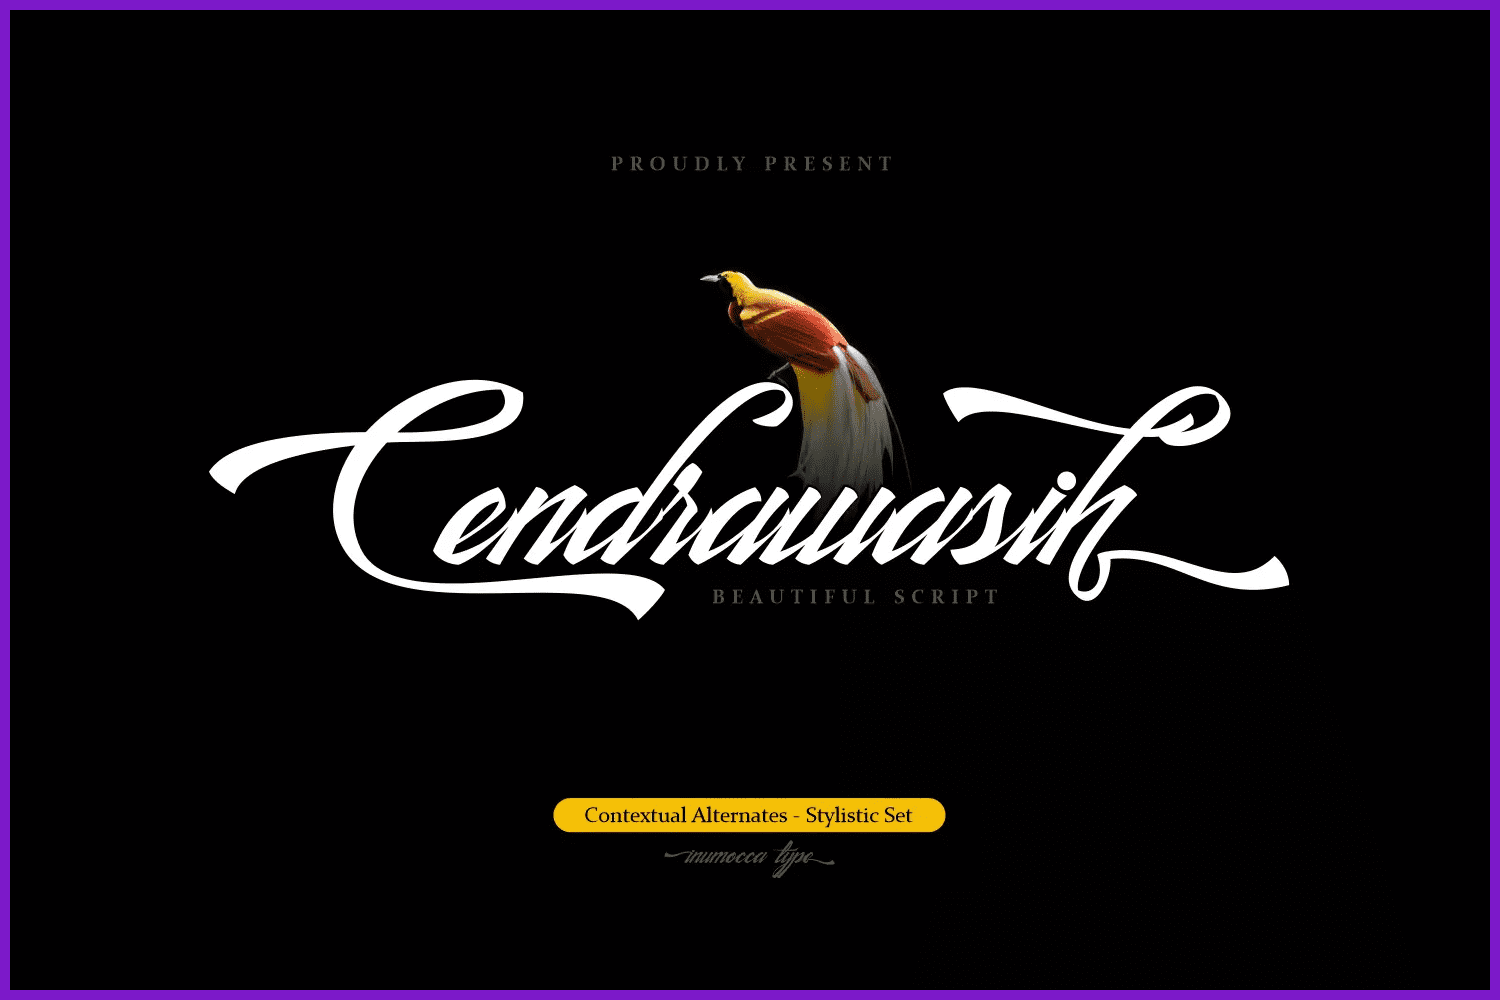 Font Cendrawasih in white letters on a black background and colored bird.